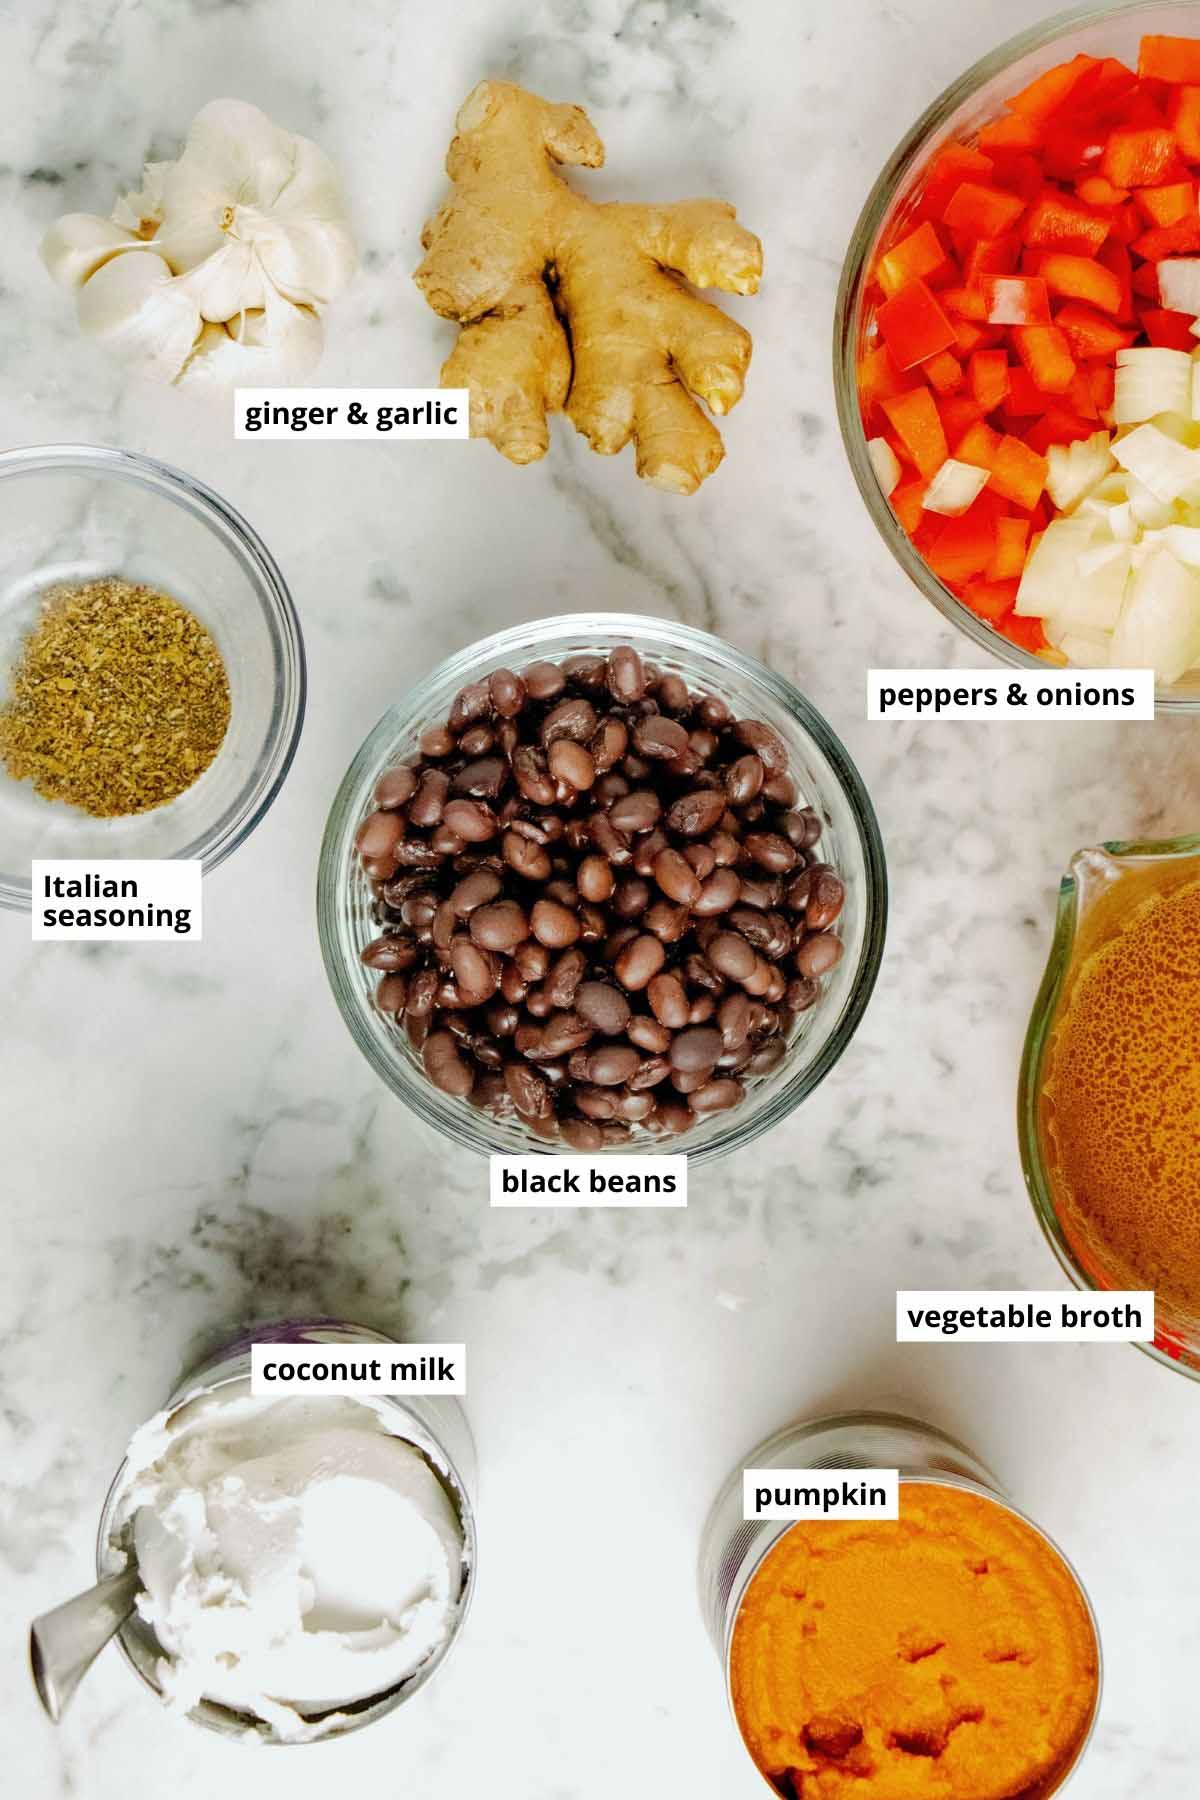 black beans, canned pumpkin, coconut milk, and other soup ingredients on a white table